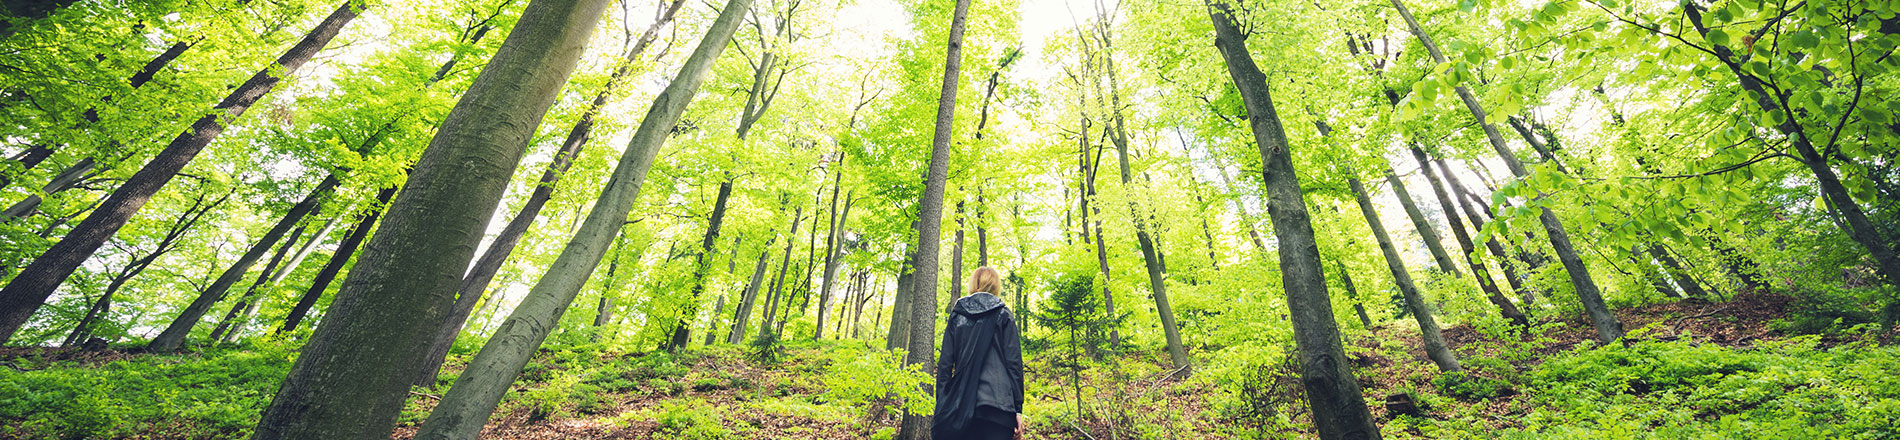 A person standing in a forest surrounded by large trees